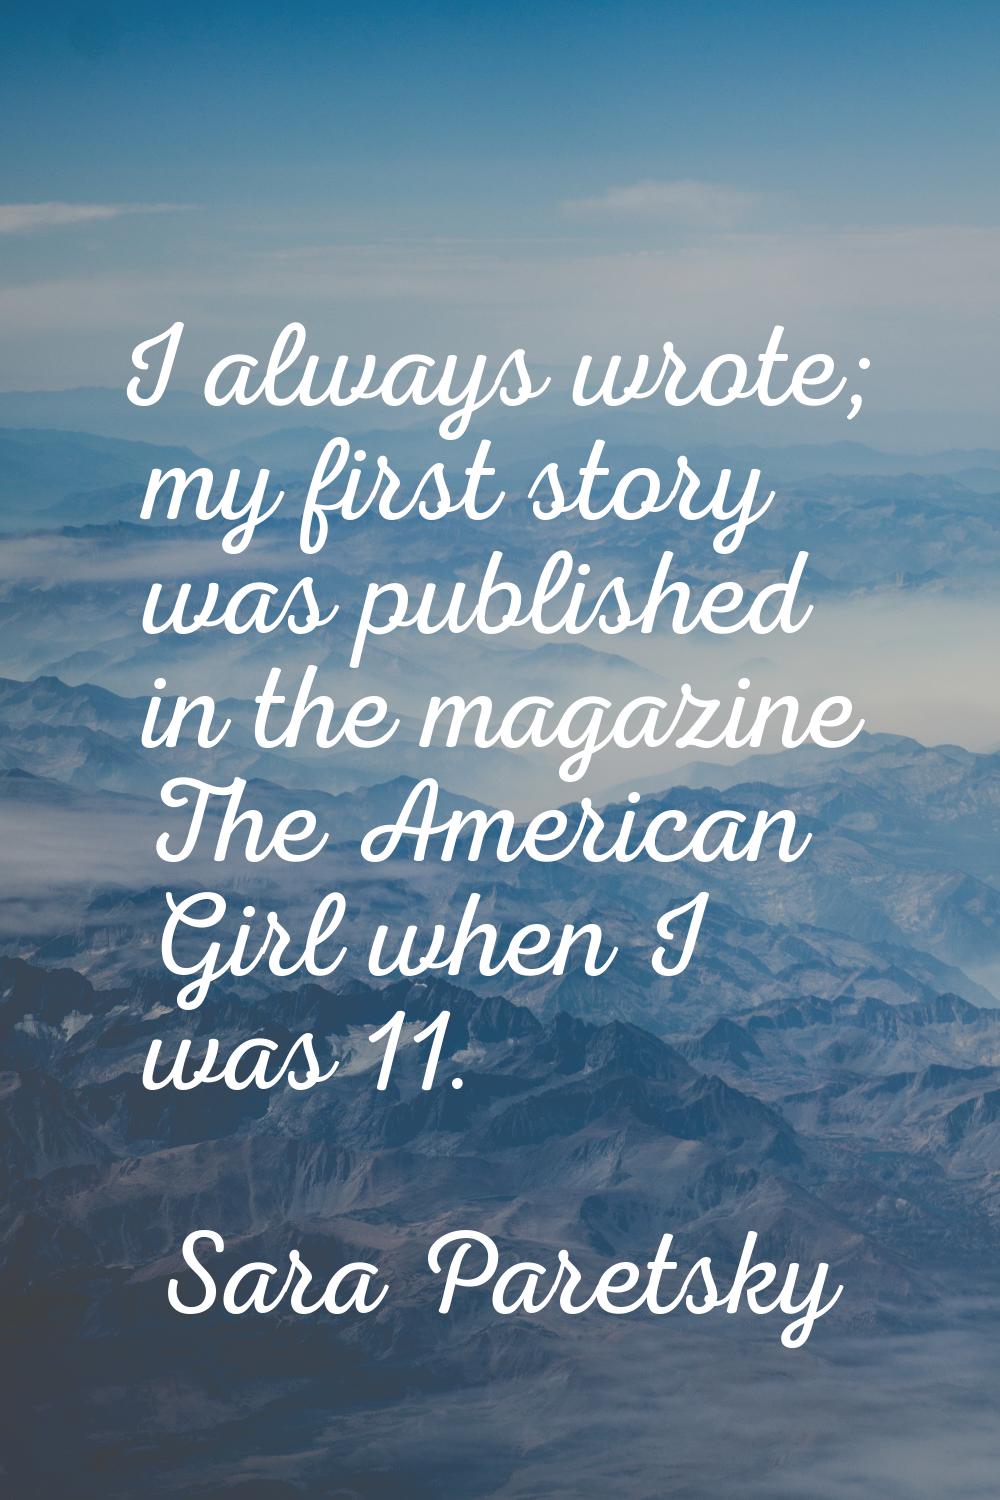 I always wrote; my first story was published in the magazine The American Girl when I was 11.